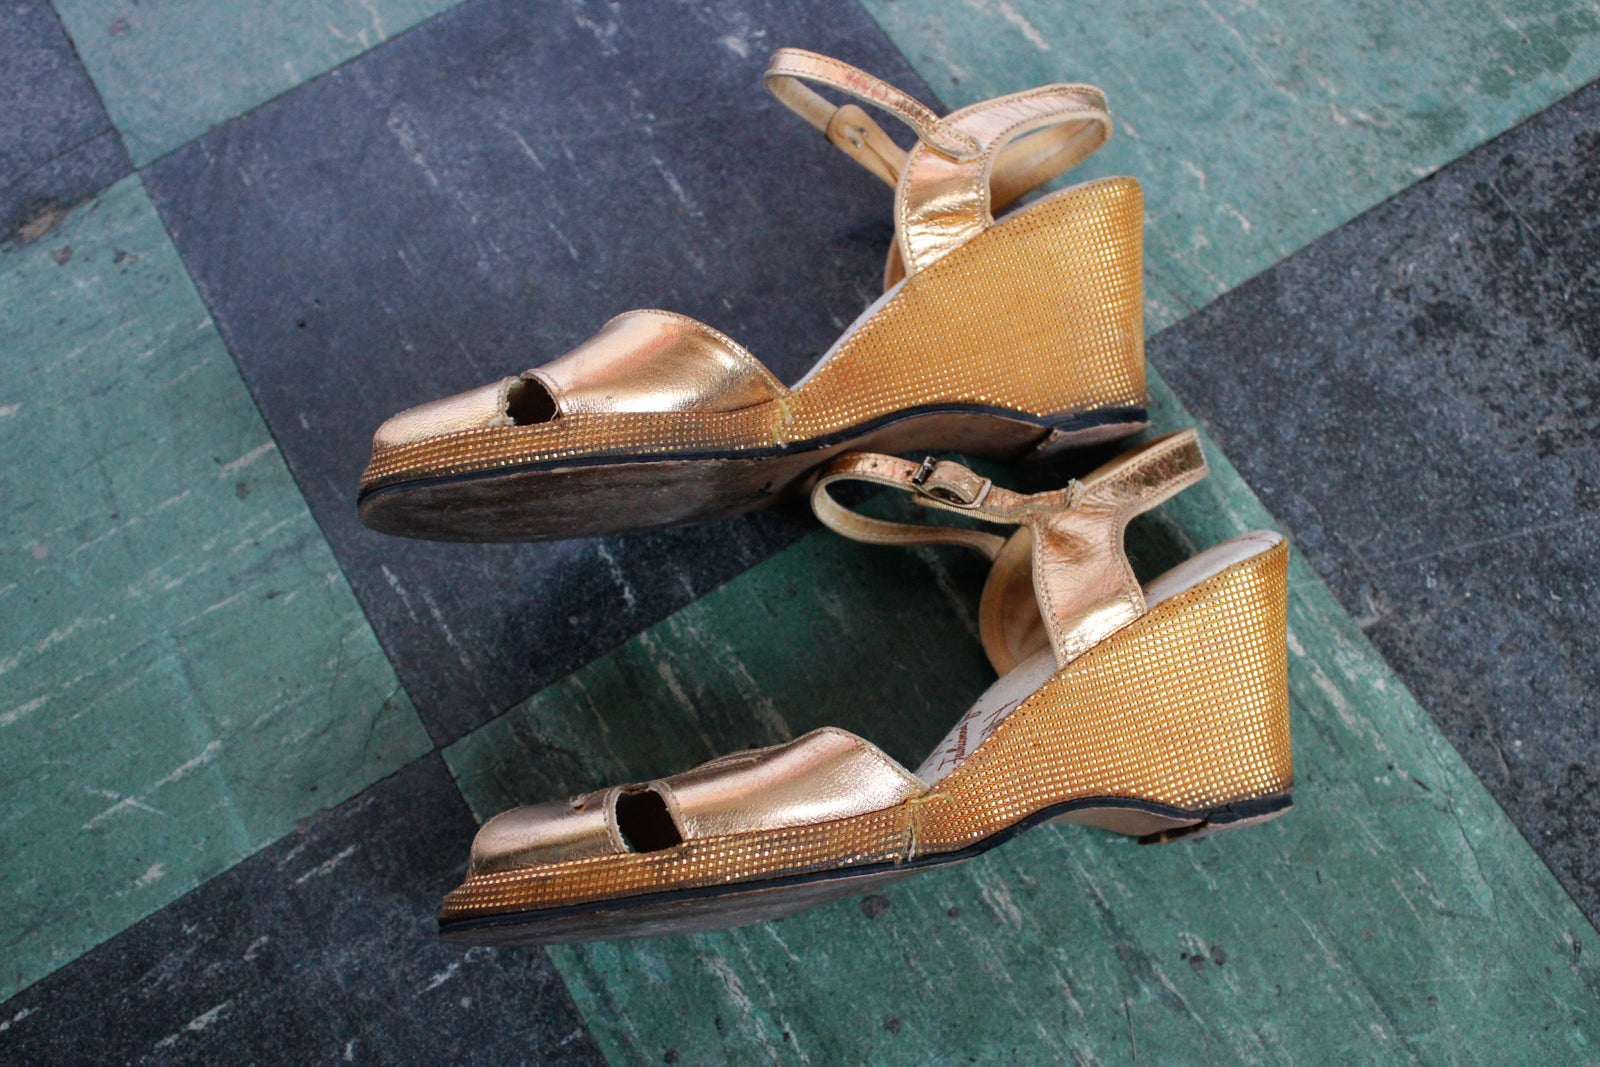 1940s Gold Peep Toe Wedge Sandals - size 6.5